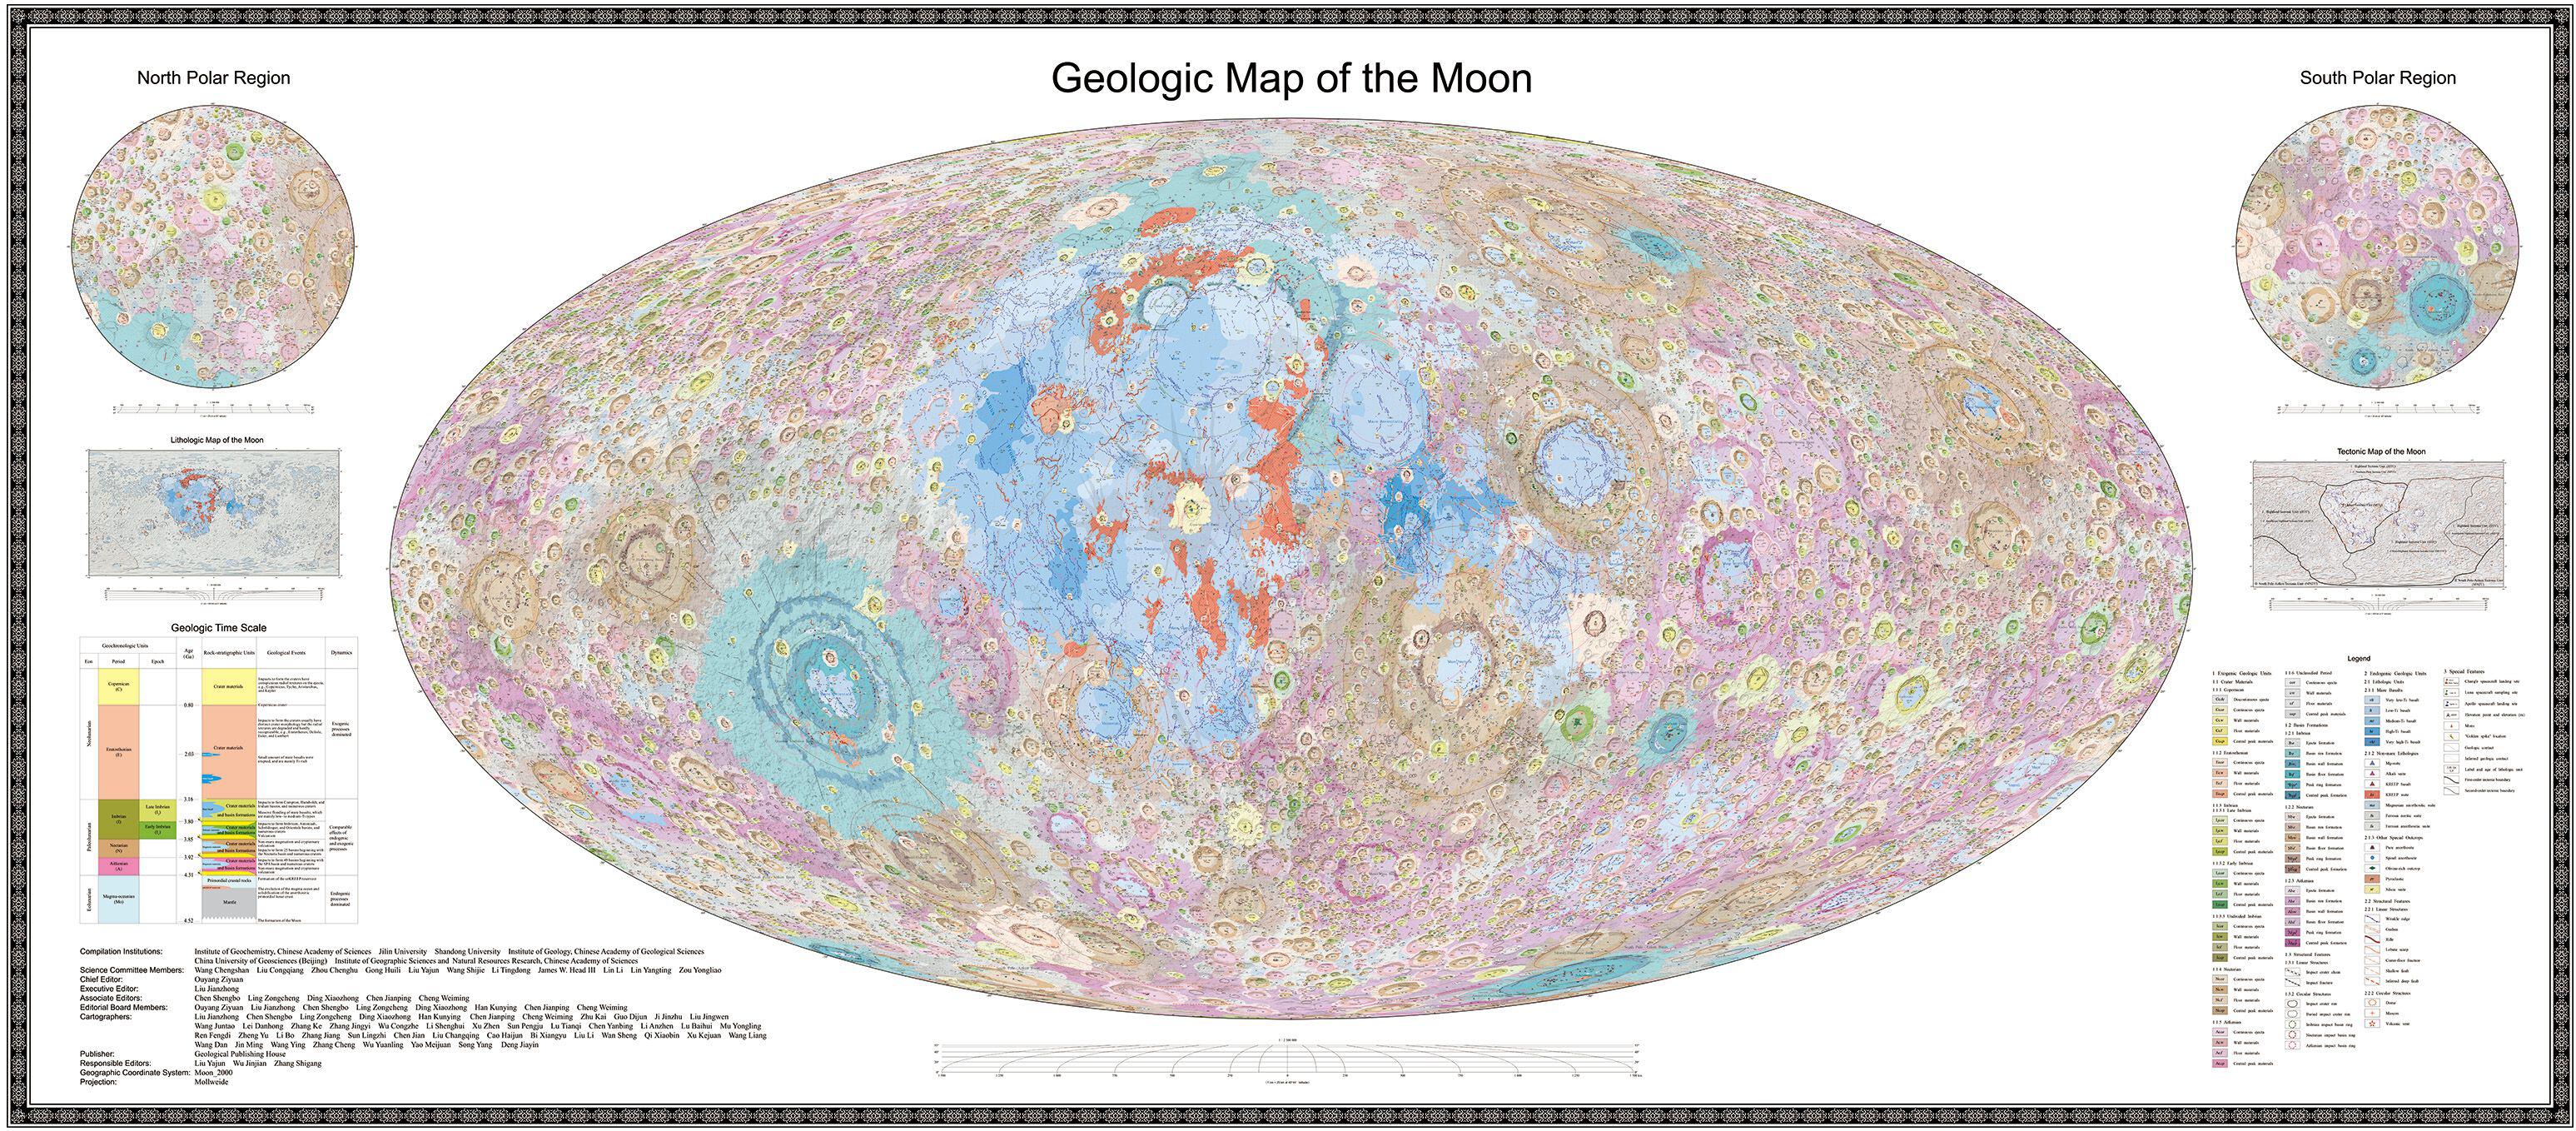 Geologic atlas of the global moon with a scale of 1:2.5 million, which is the first complete high-definition lunar geologic atlas in the world, providing basic map data for future lunar research and exploration. This page is the Geologic Map of the Moon.